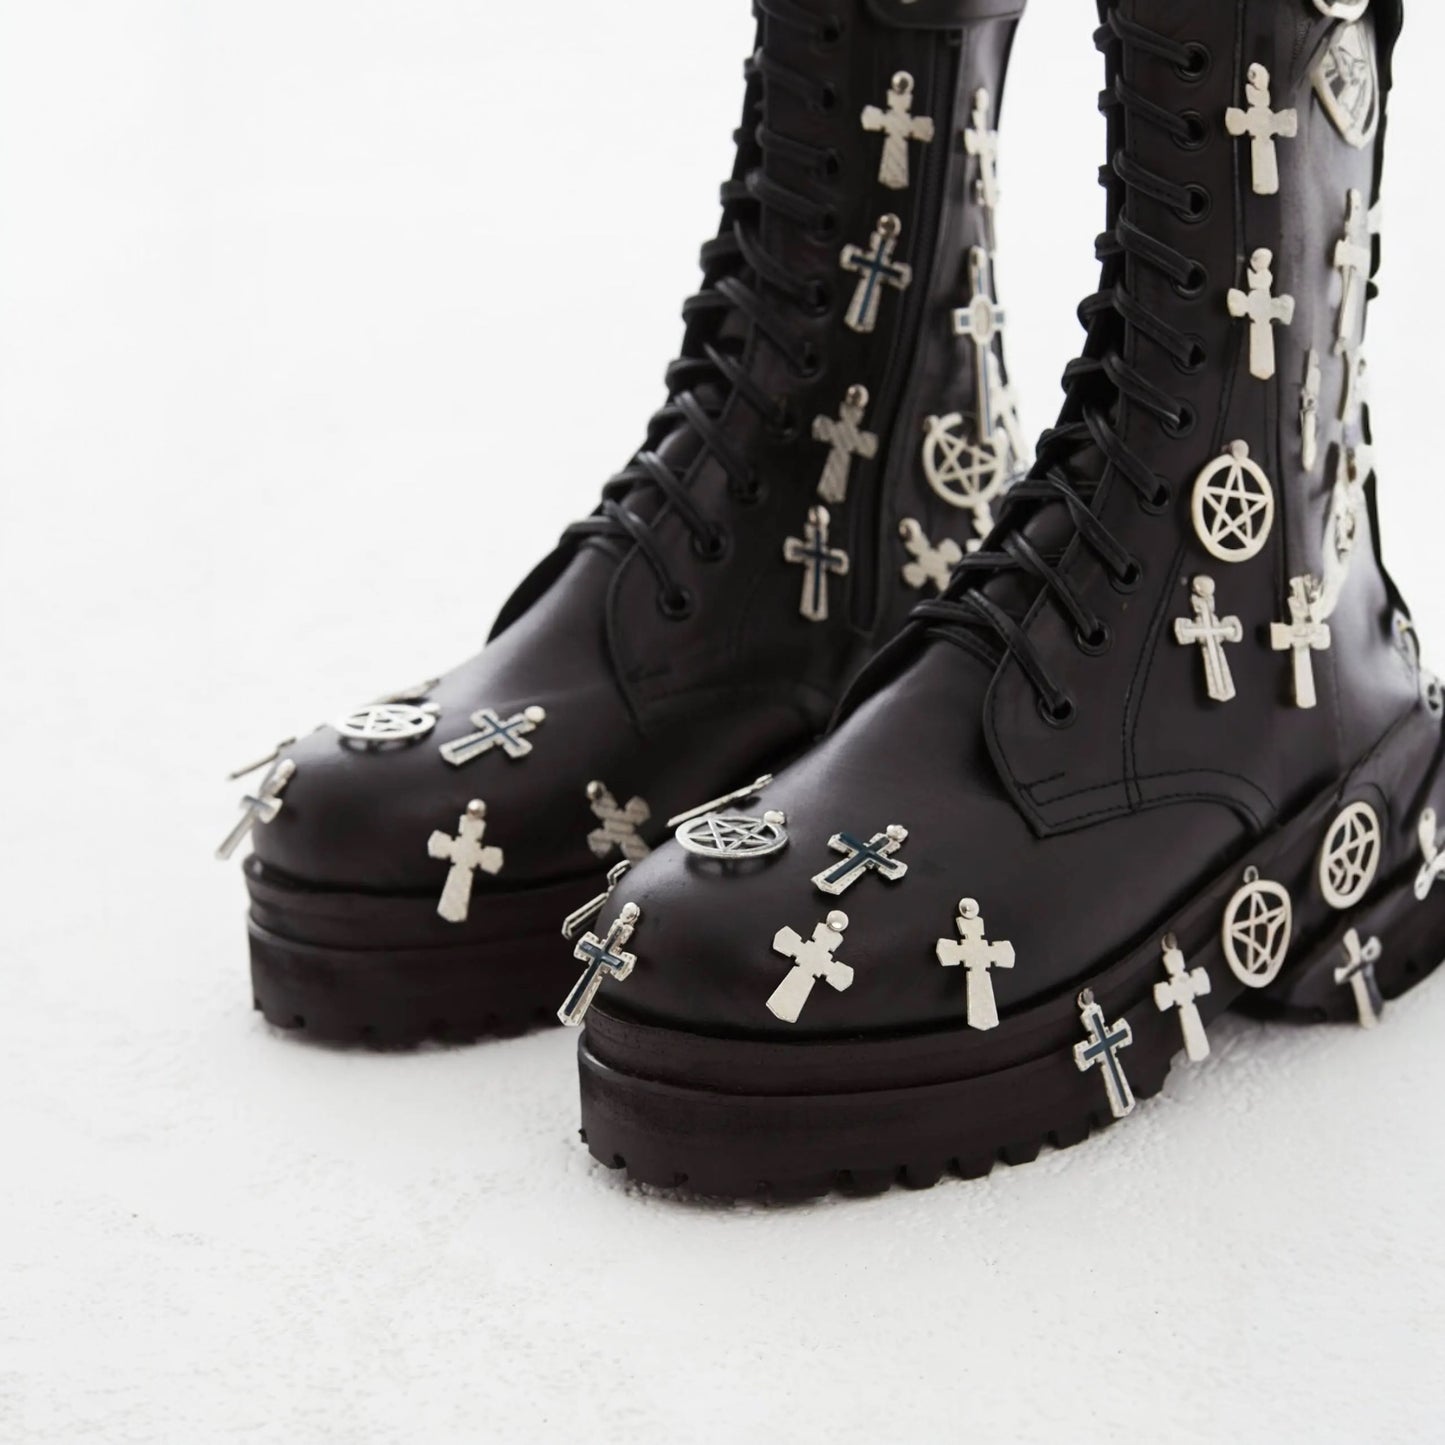 Boots massive black 9 with crosses